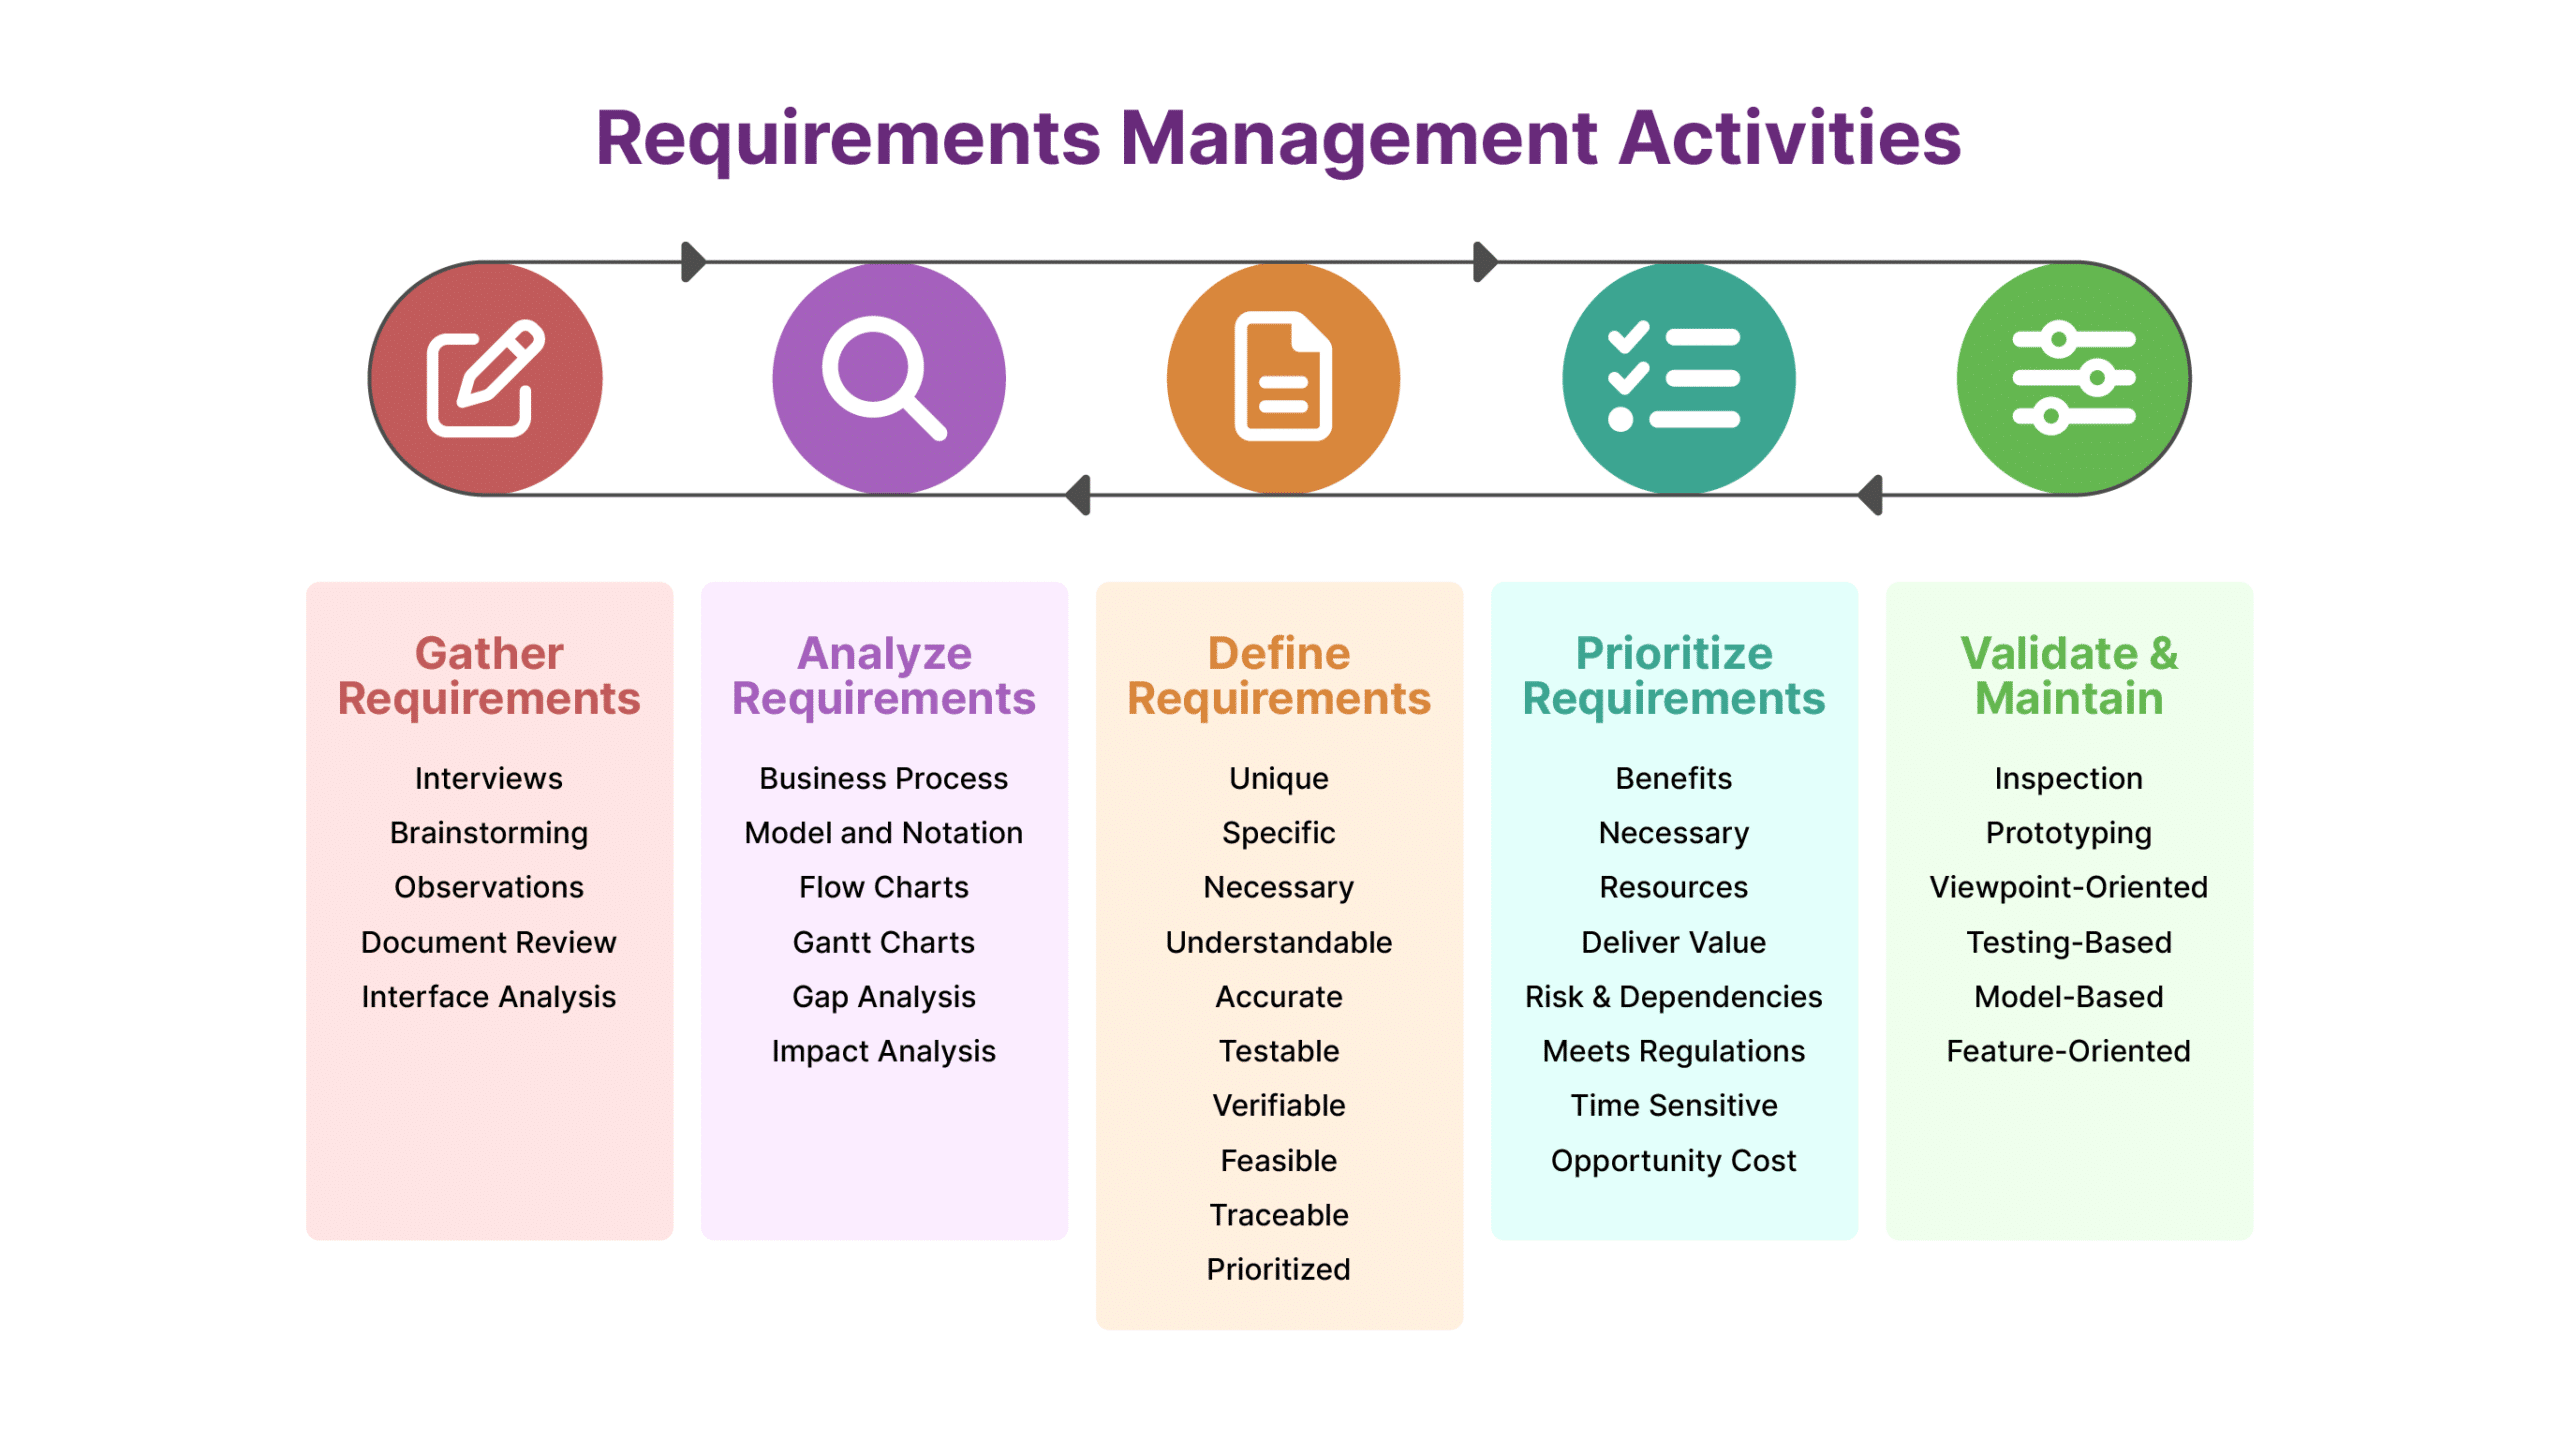 Icons and text describing requirements management activities like gather, analyzing, defining, prioritizing, and validating requirements.